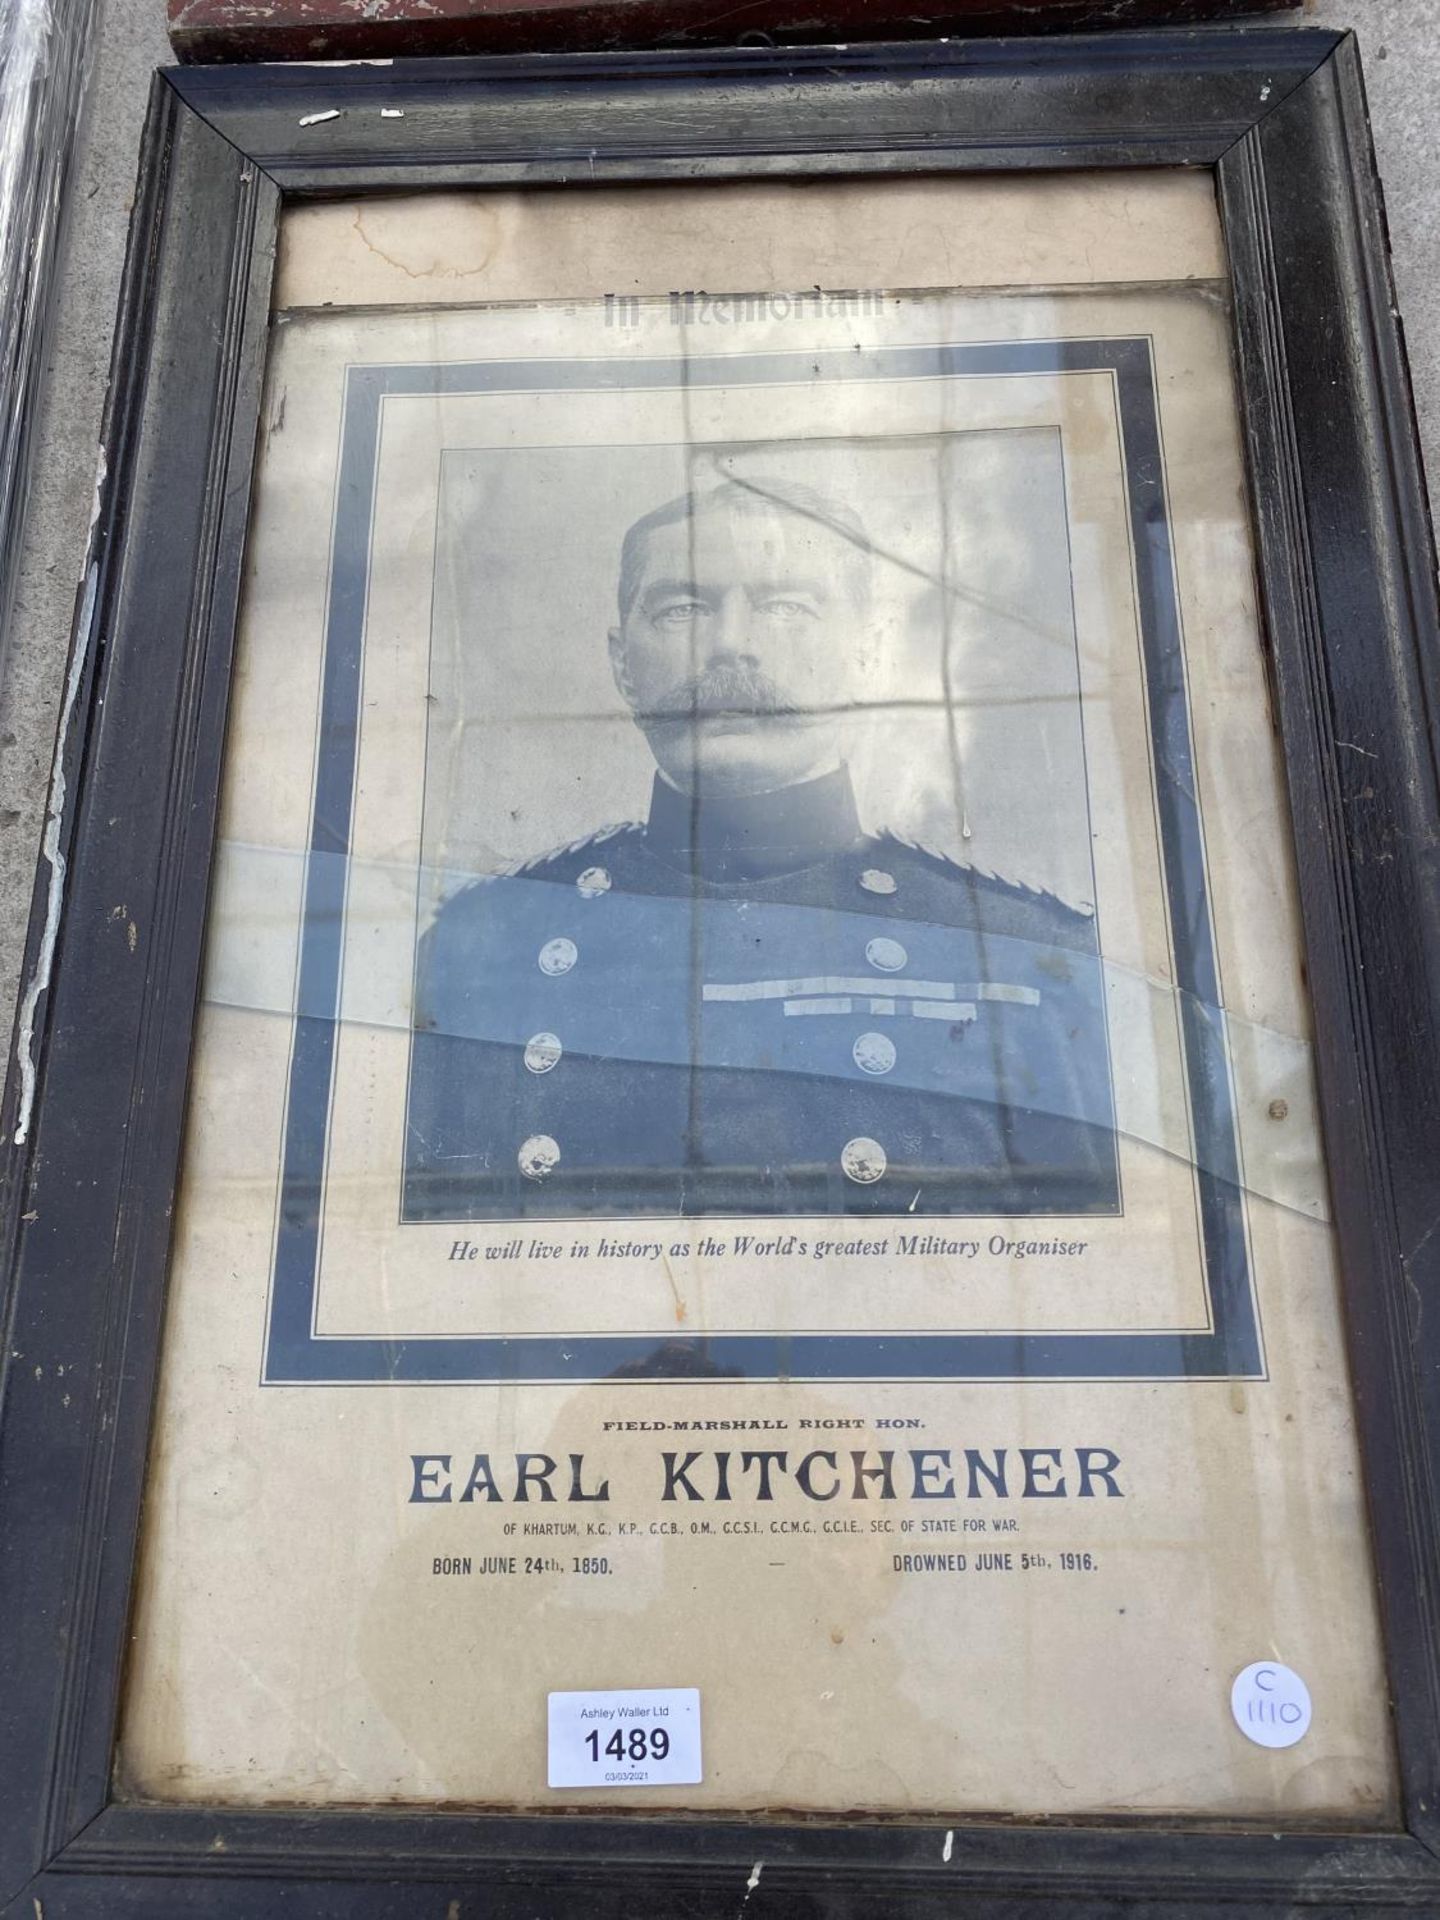 A VINTAGE WOODEN WIMBLEDON SIGN AND A FURTHER VINTAGE 'EARL KITCHENER' POSTER - Image 2 of 3